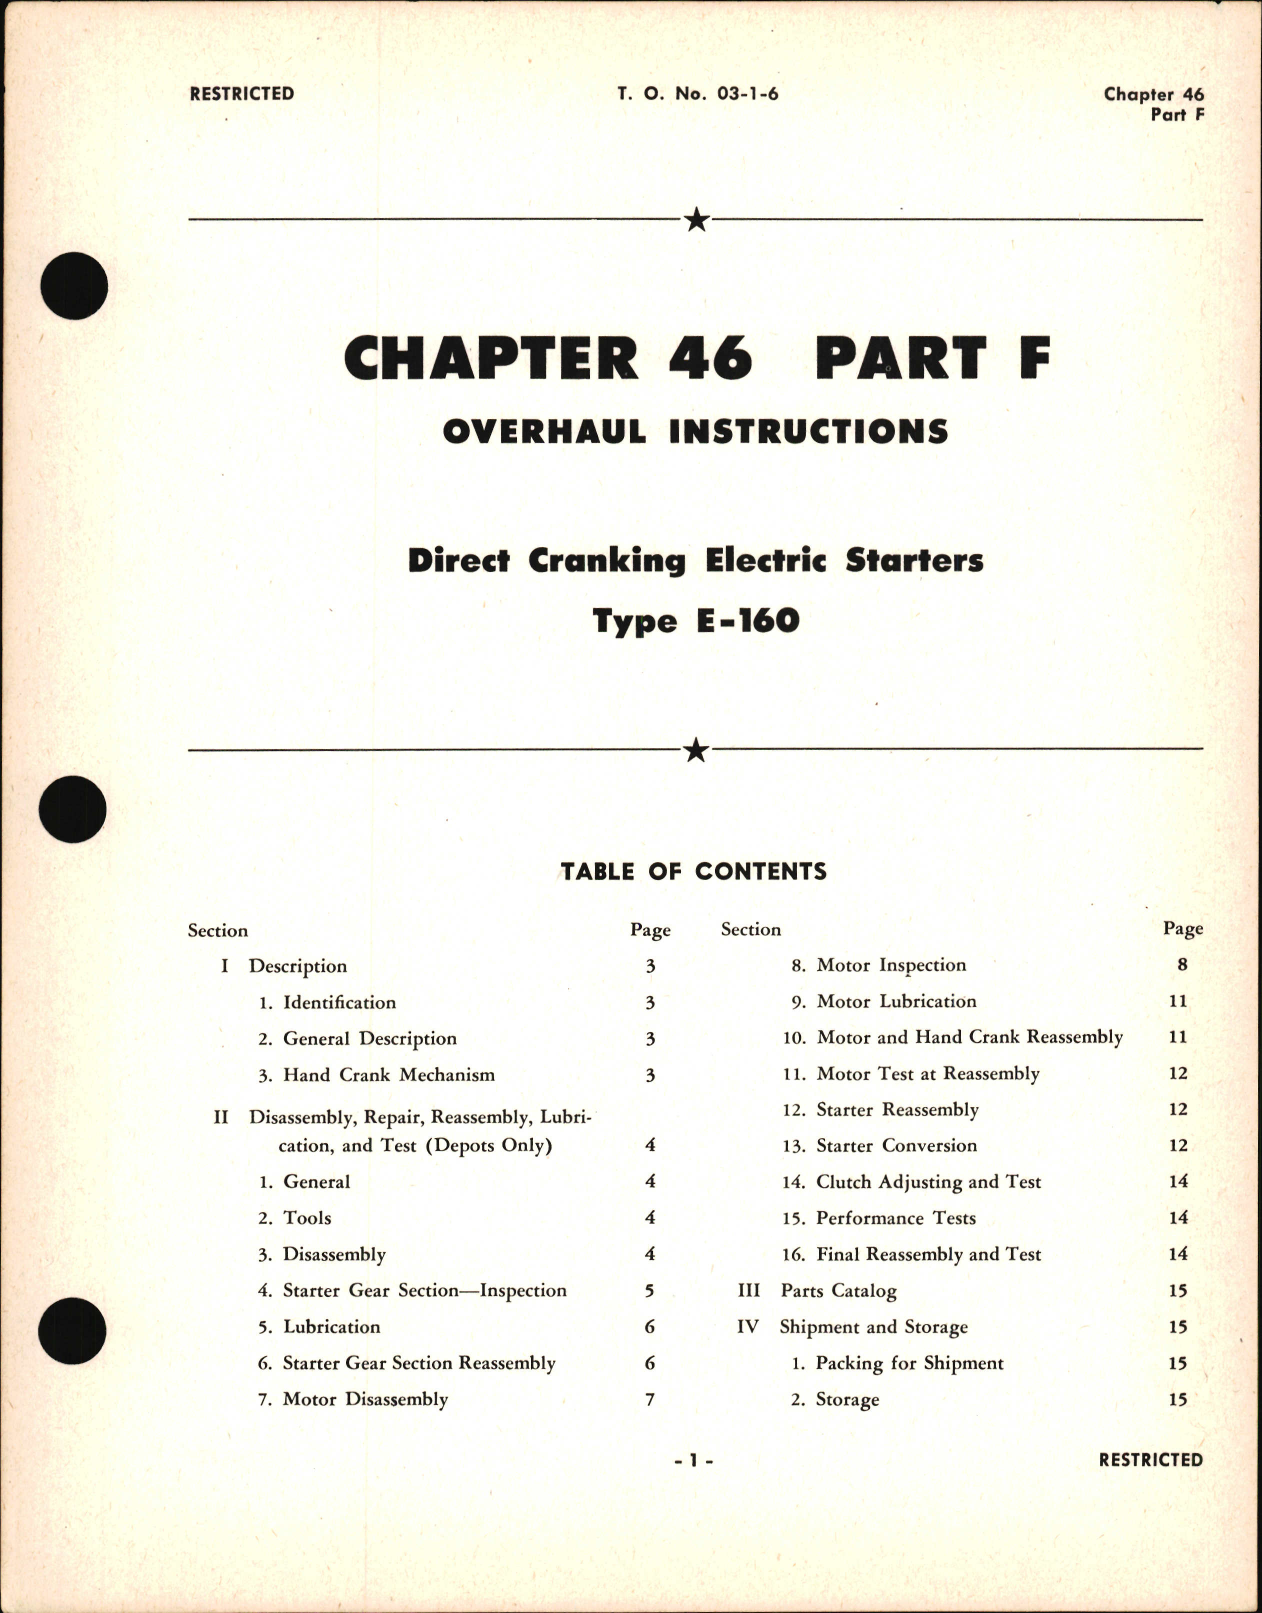 Sample page 1 from AirCorps Library document: Overhaul Instructions for Direct Cranking Electric Starters, Chapter 46 Part F